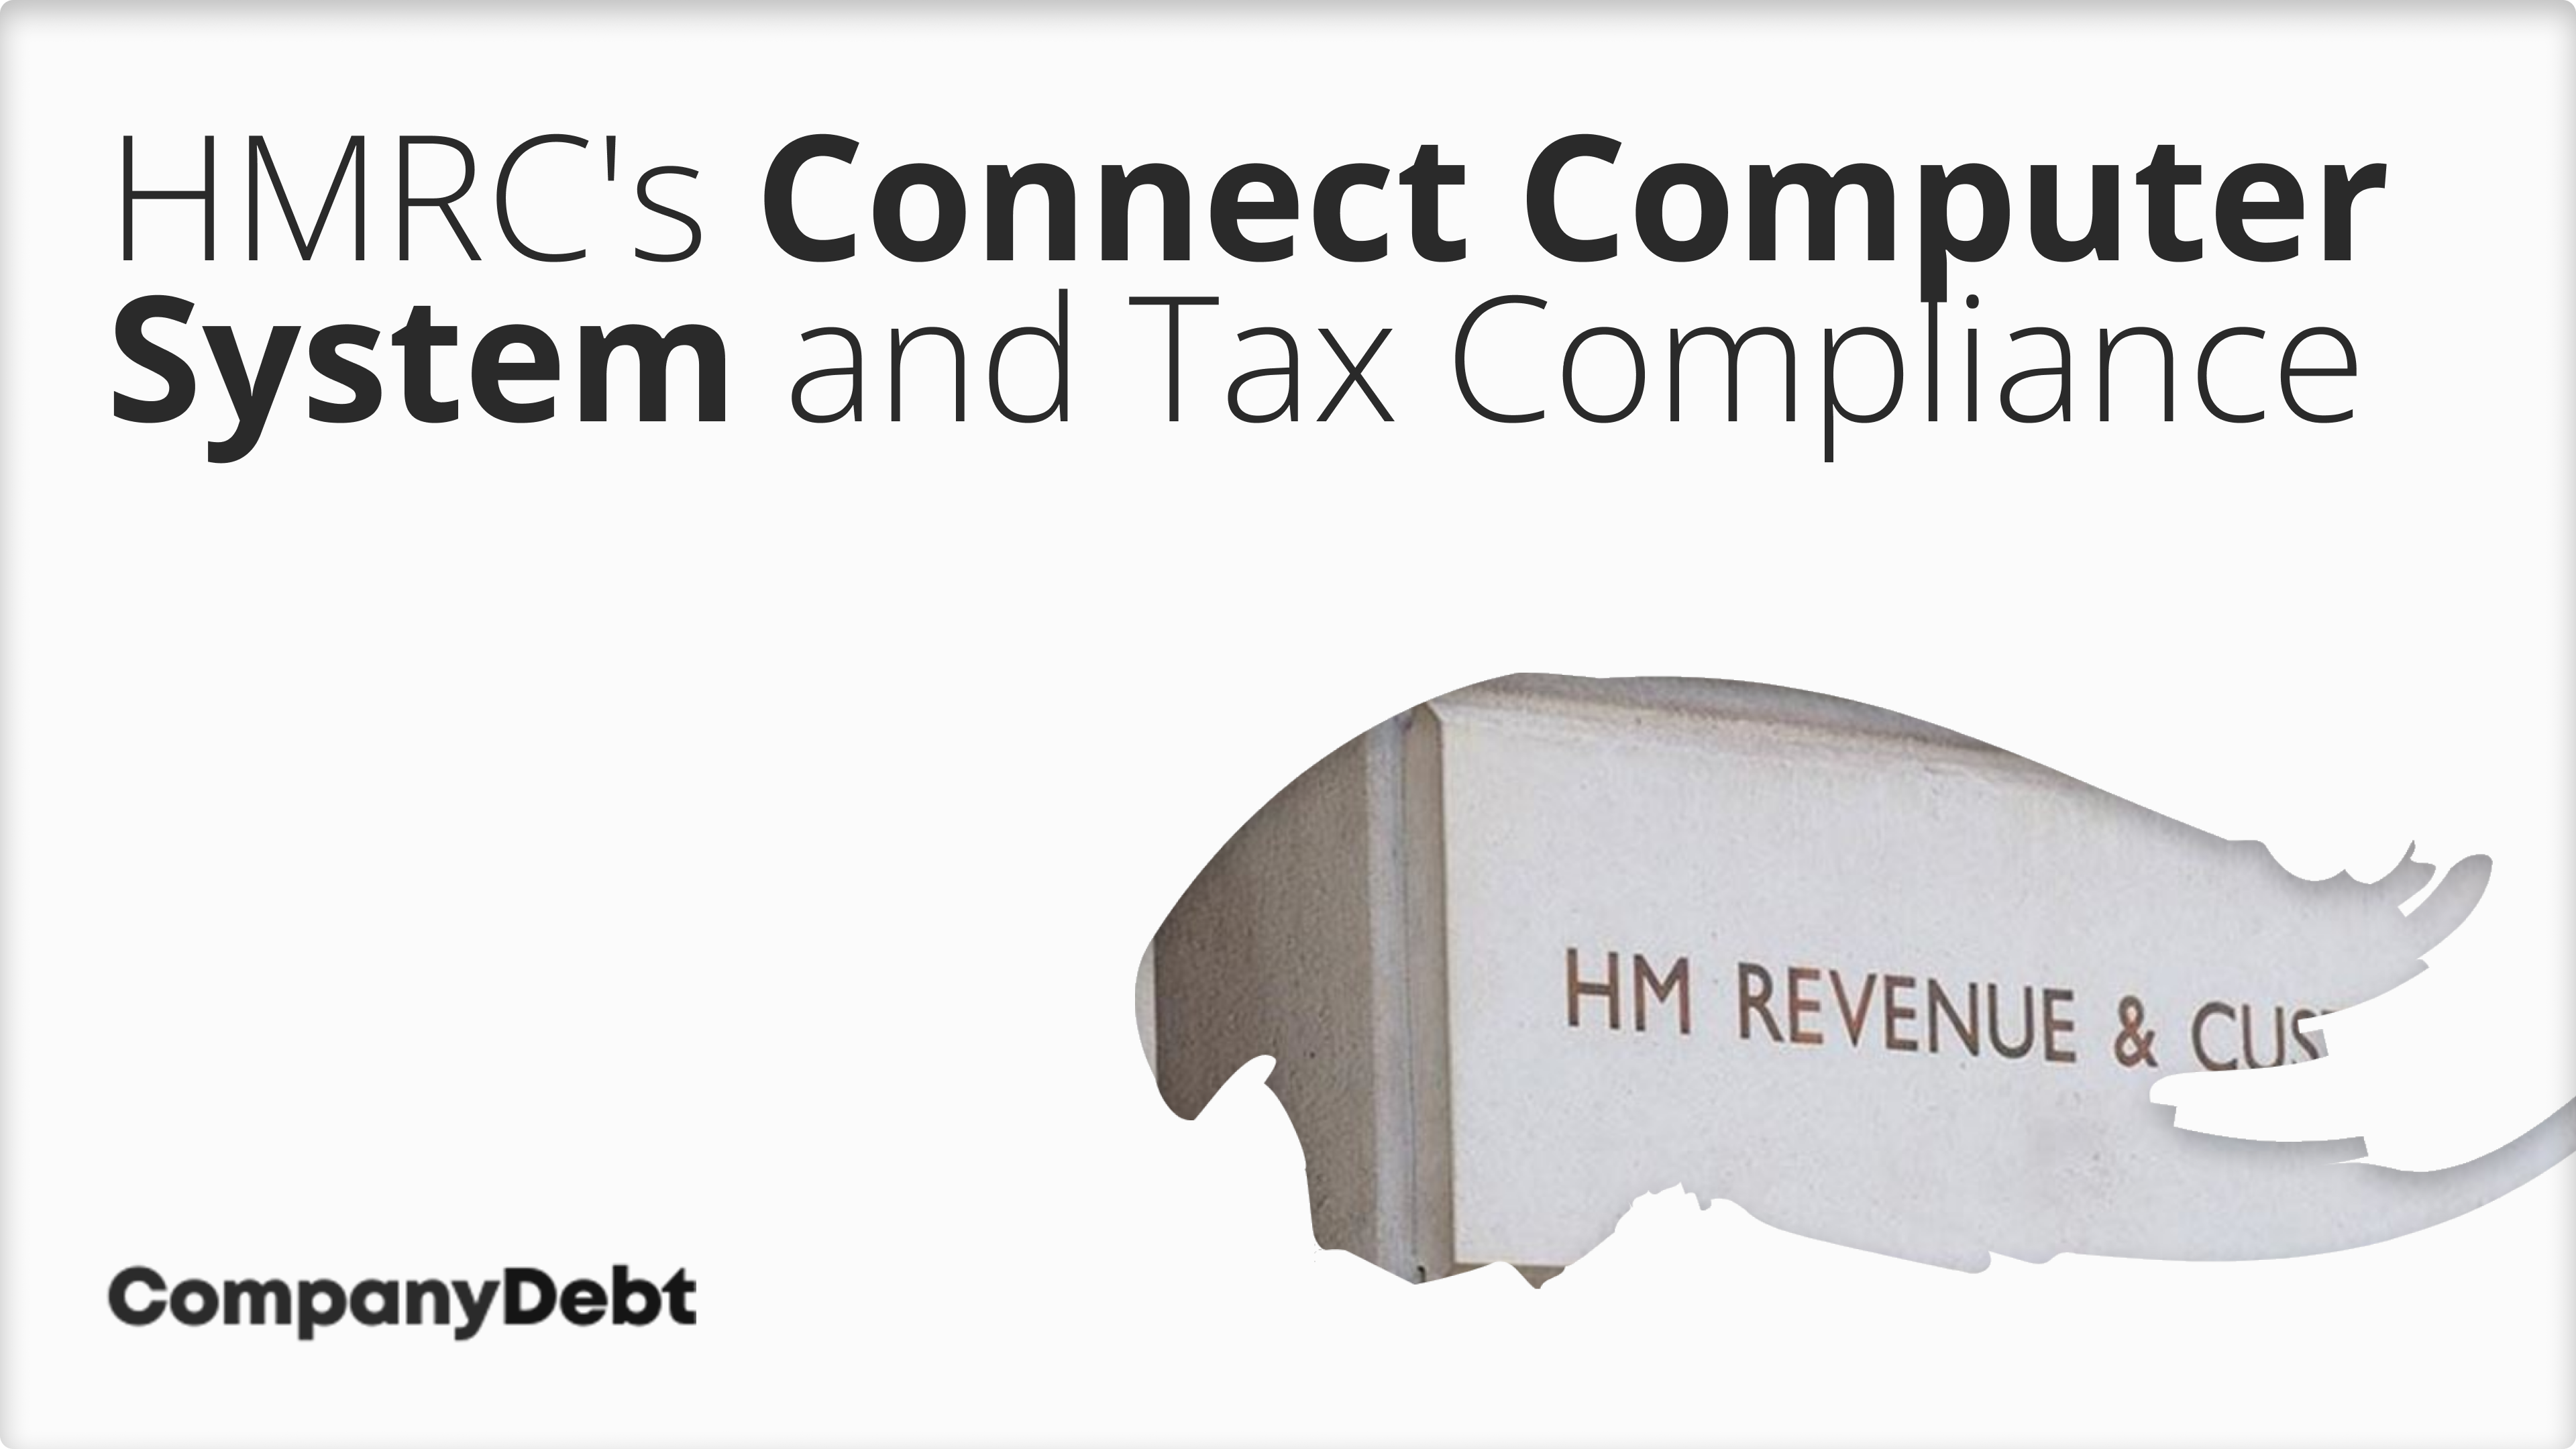 What-is-HMRCs-Connect-Computer-System-and-how-is-it-Being-Used-for-Tax-Compliance_